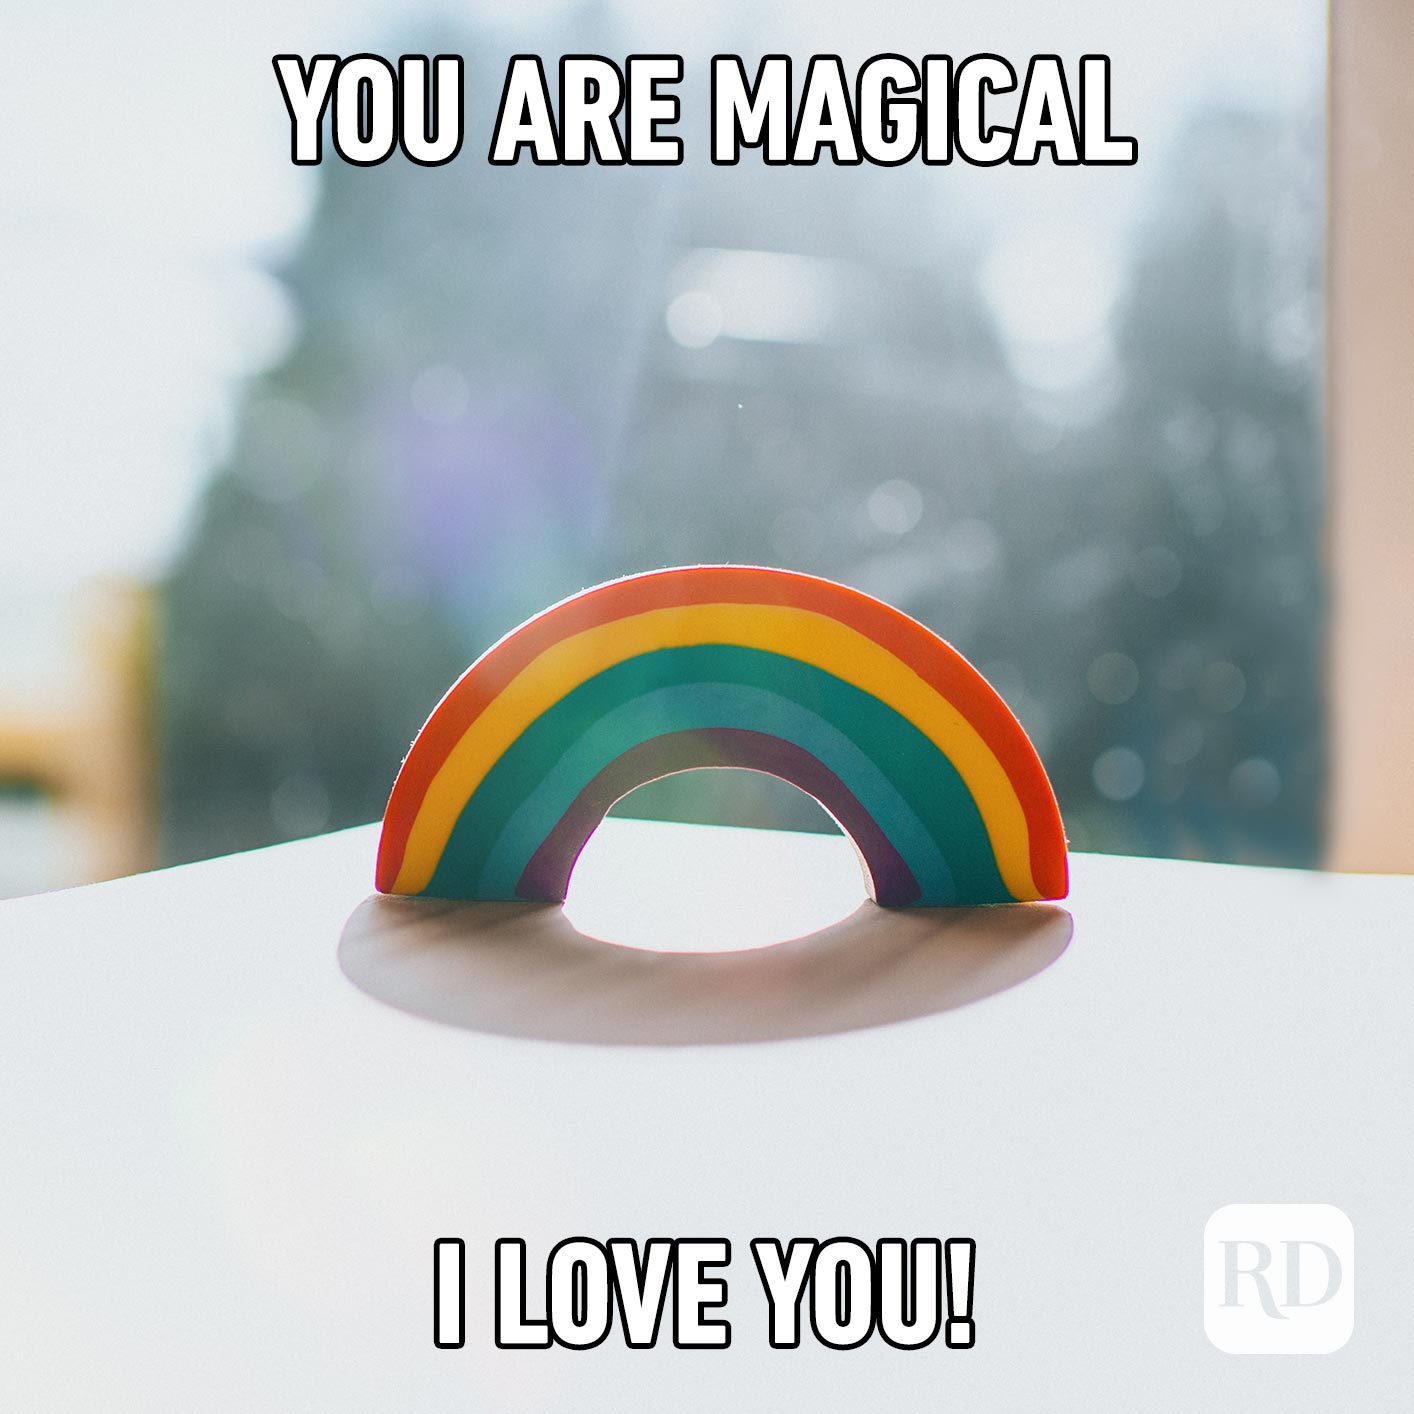 Shining rainbow. Meme text: You are magical. I love you!